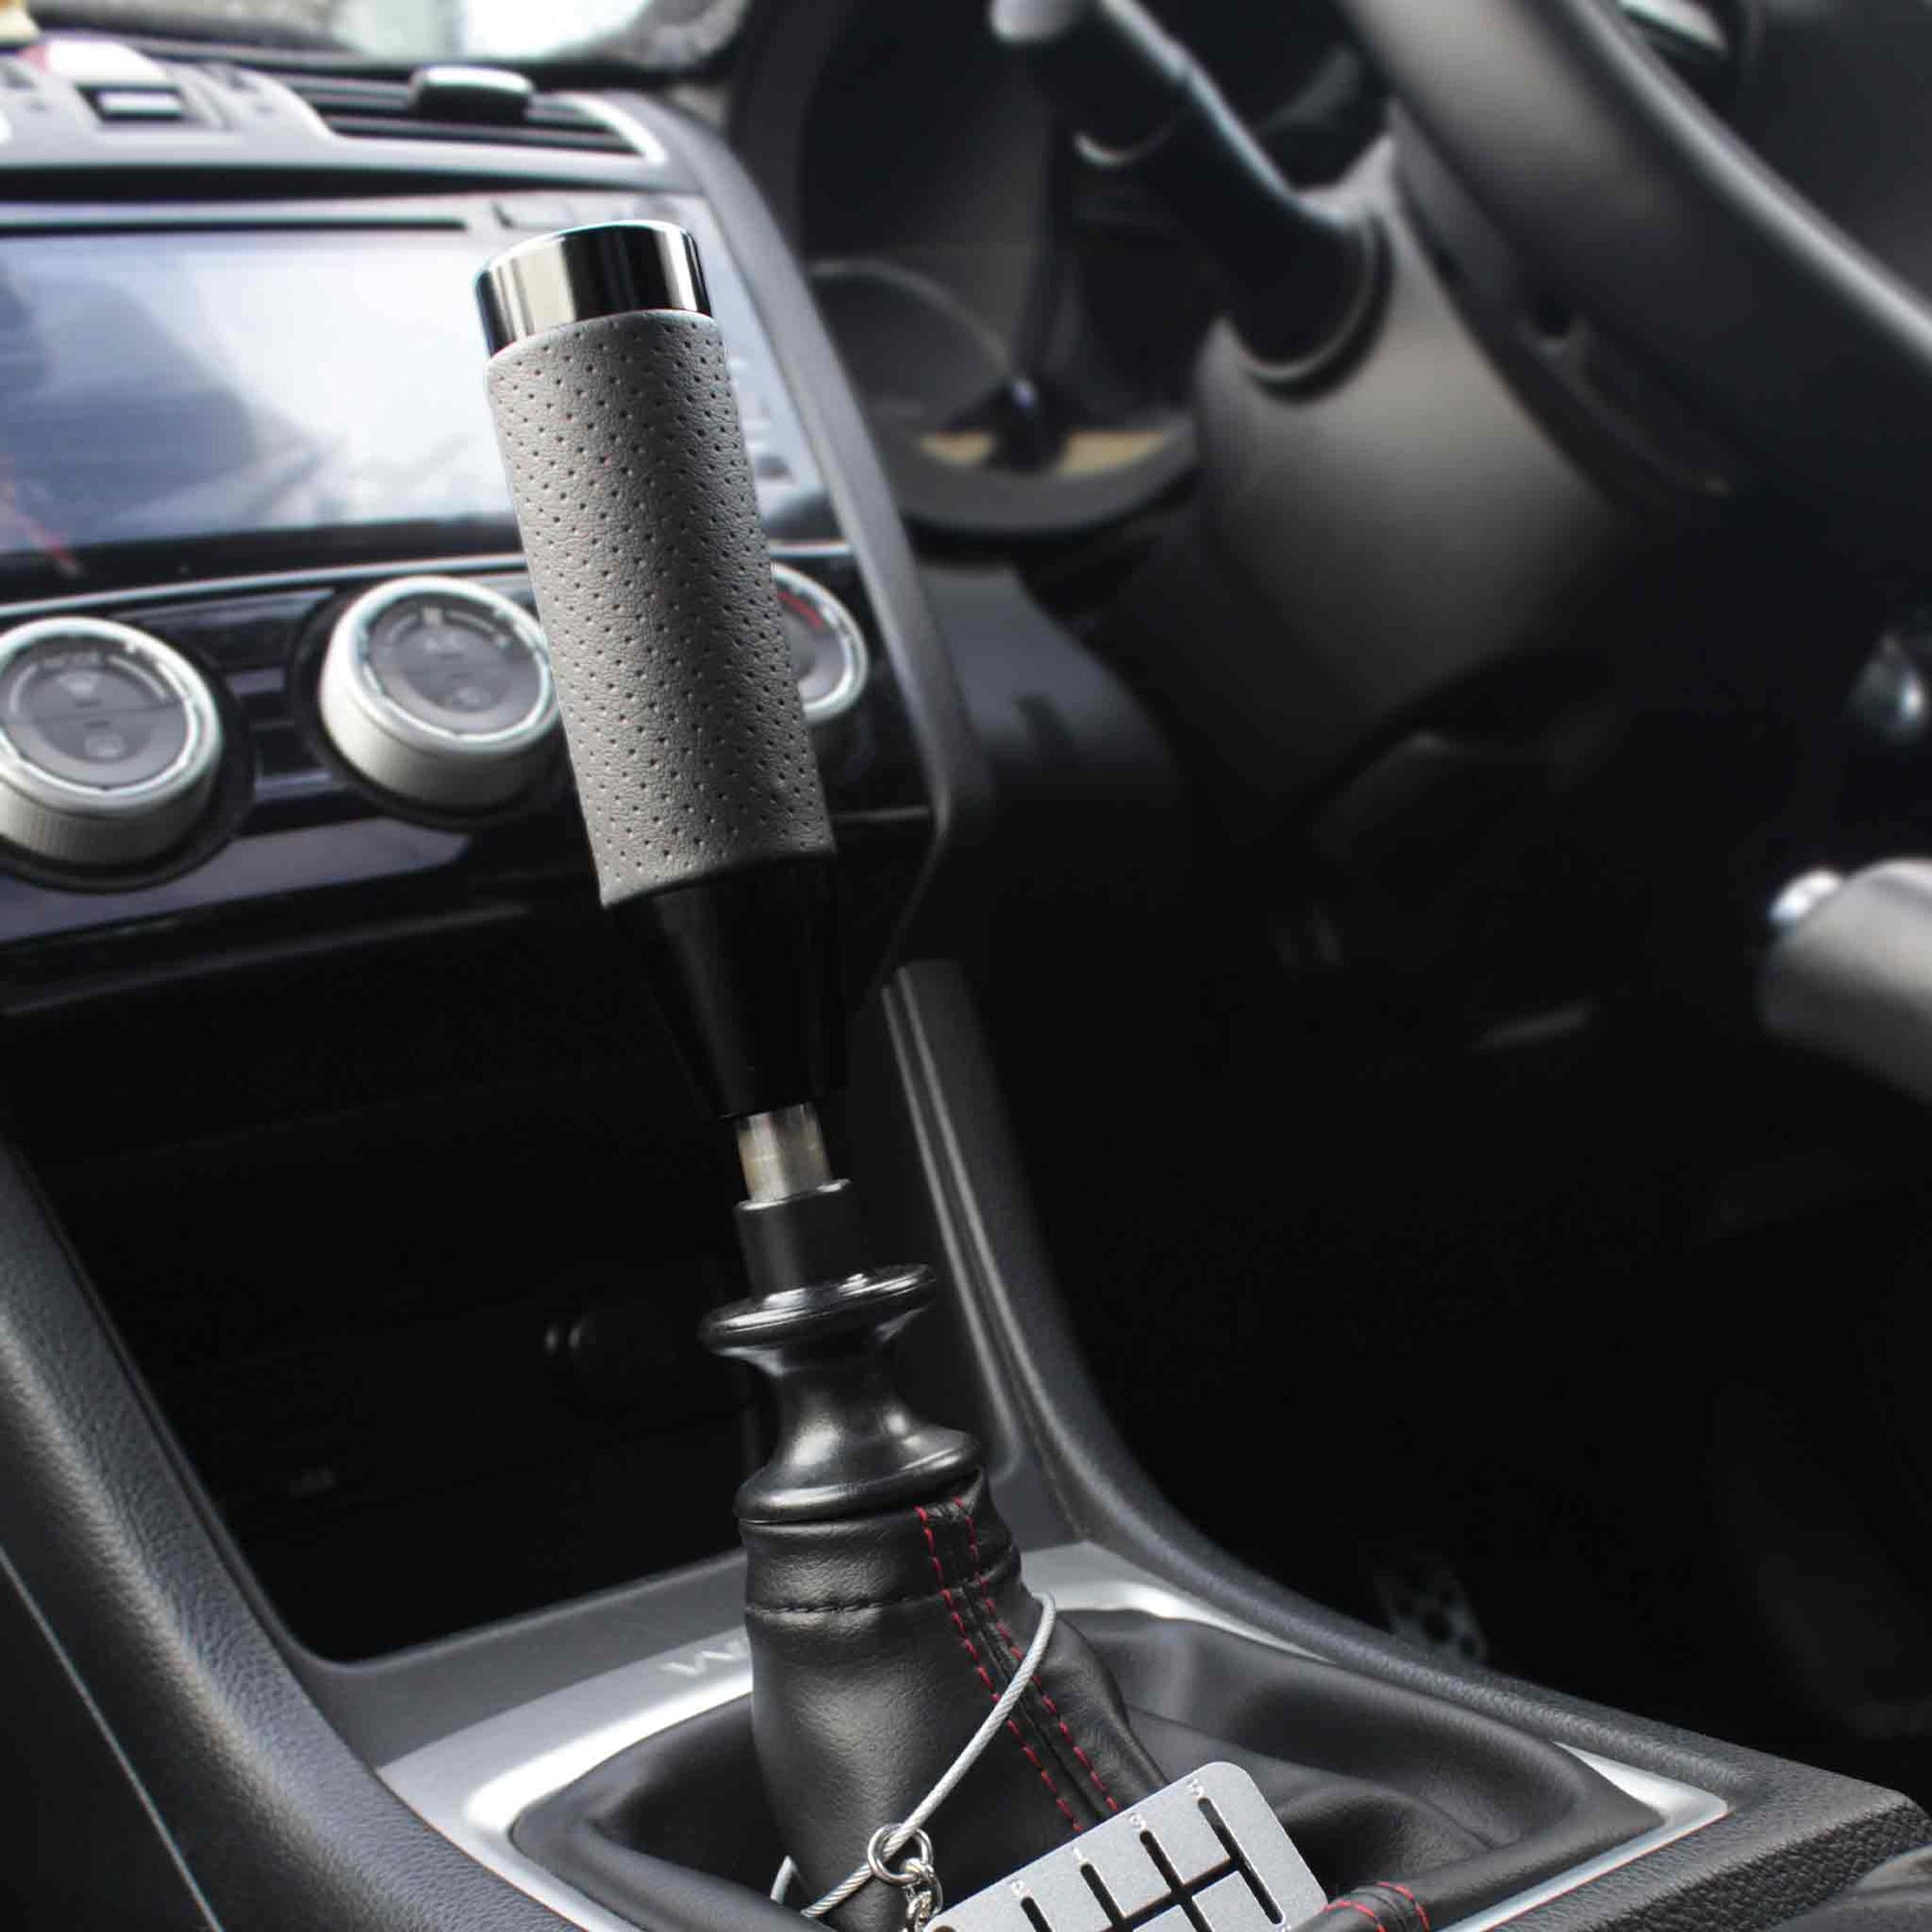 A black leather grip shift knob is installed on a manual WRX, and a six-speed dog-tag is hanging around the shift boot